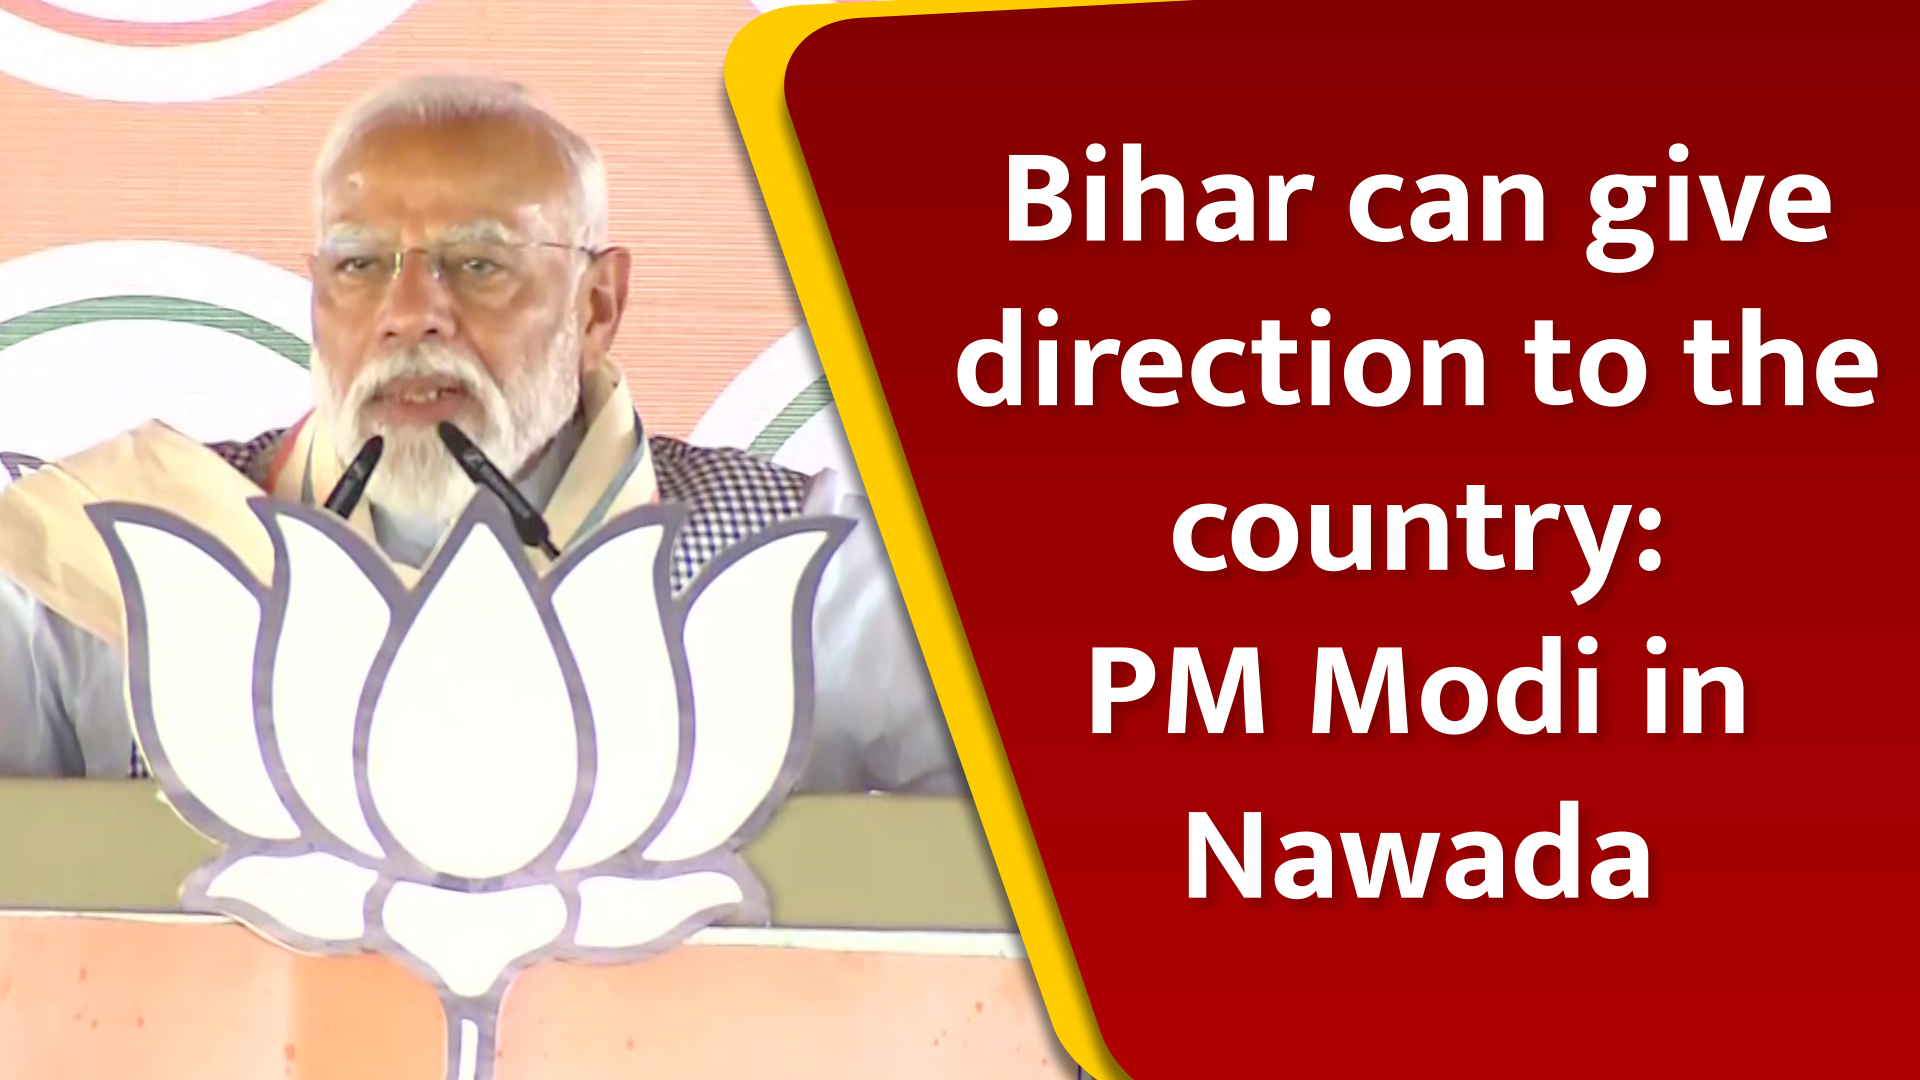 Bihar can give direction to the country: PM Narendra Modi in Nawada